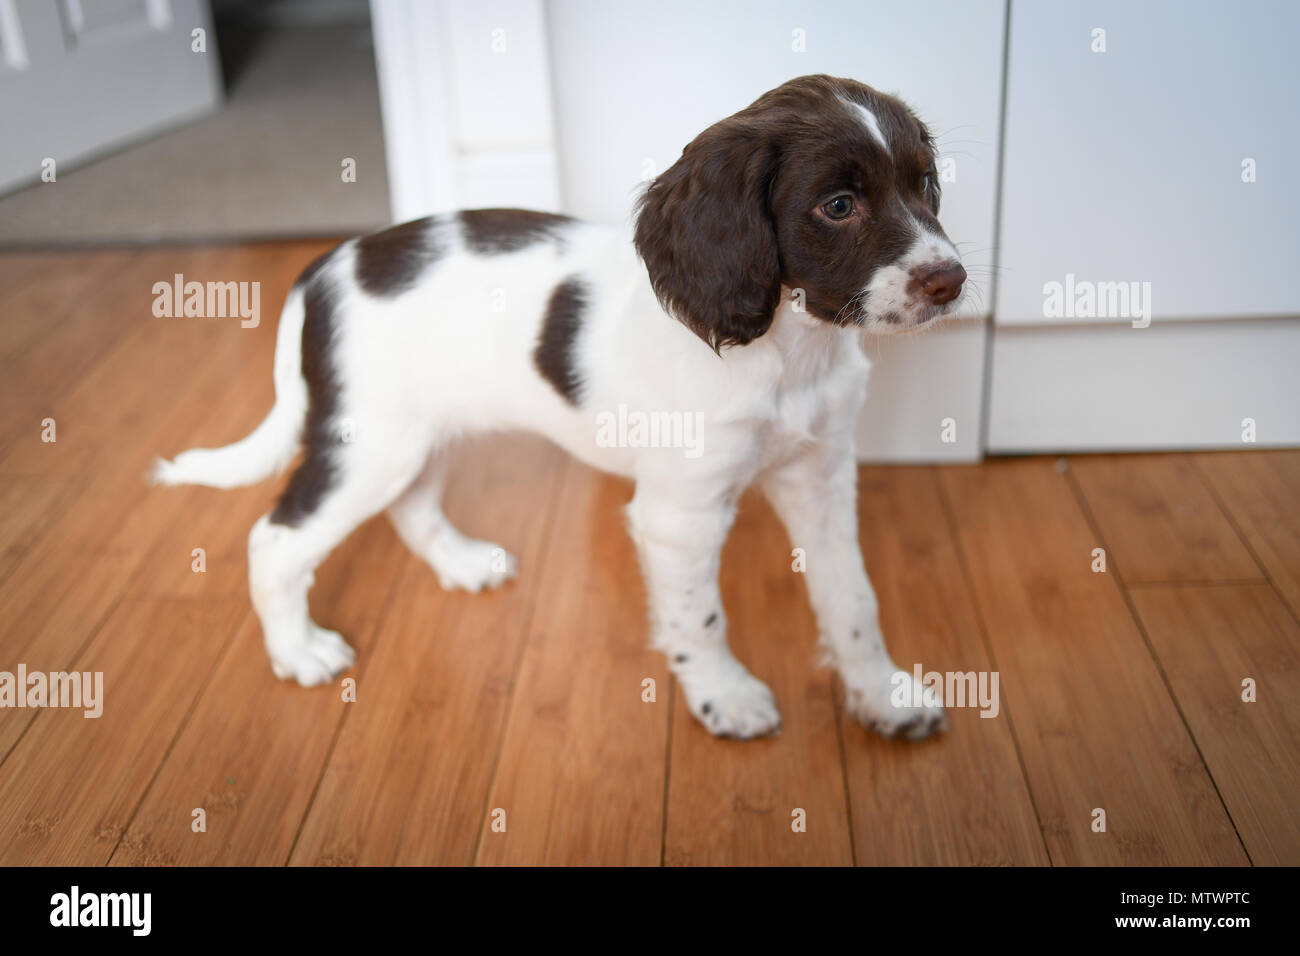 A 8 week old adorable English springer spaniel puppy standing inside on a  wooden floor Stock Photo - Alamy